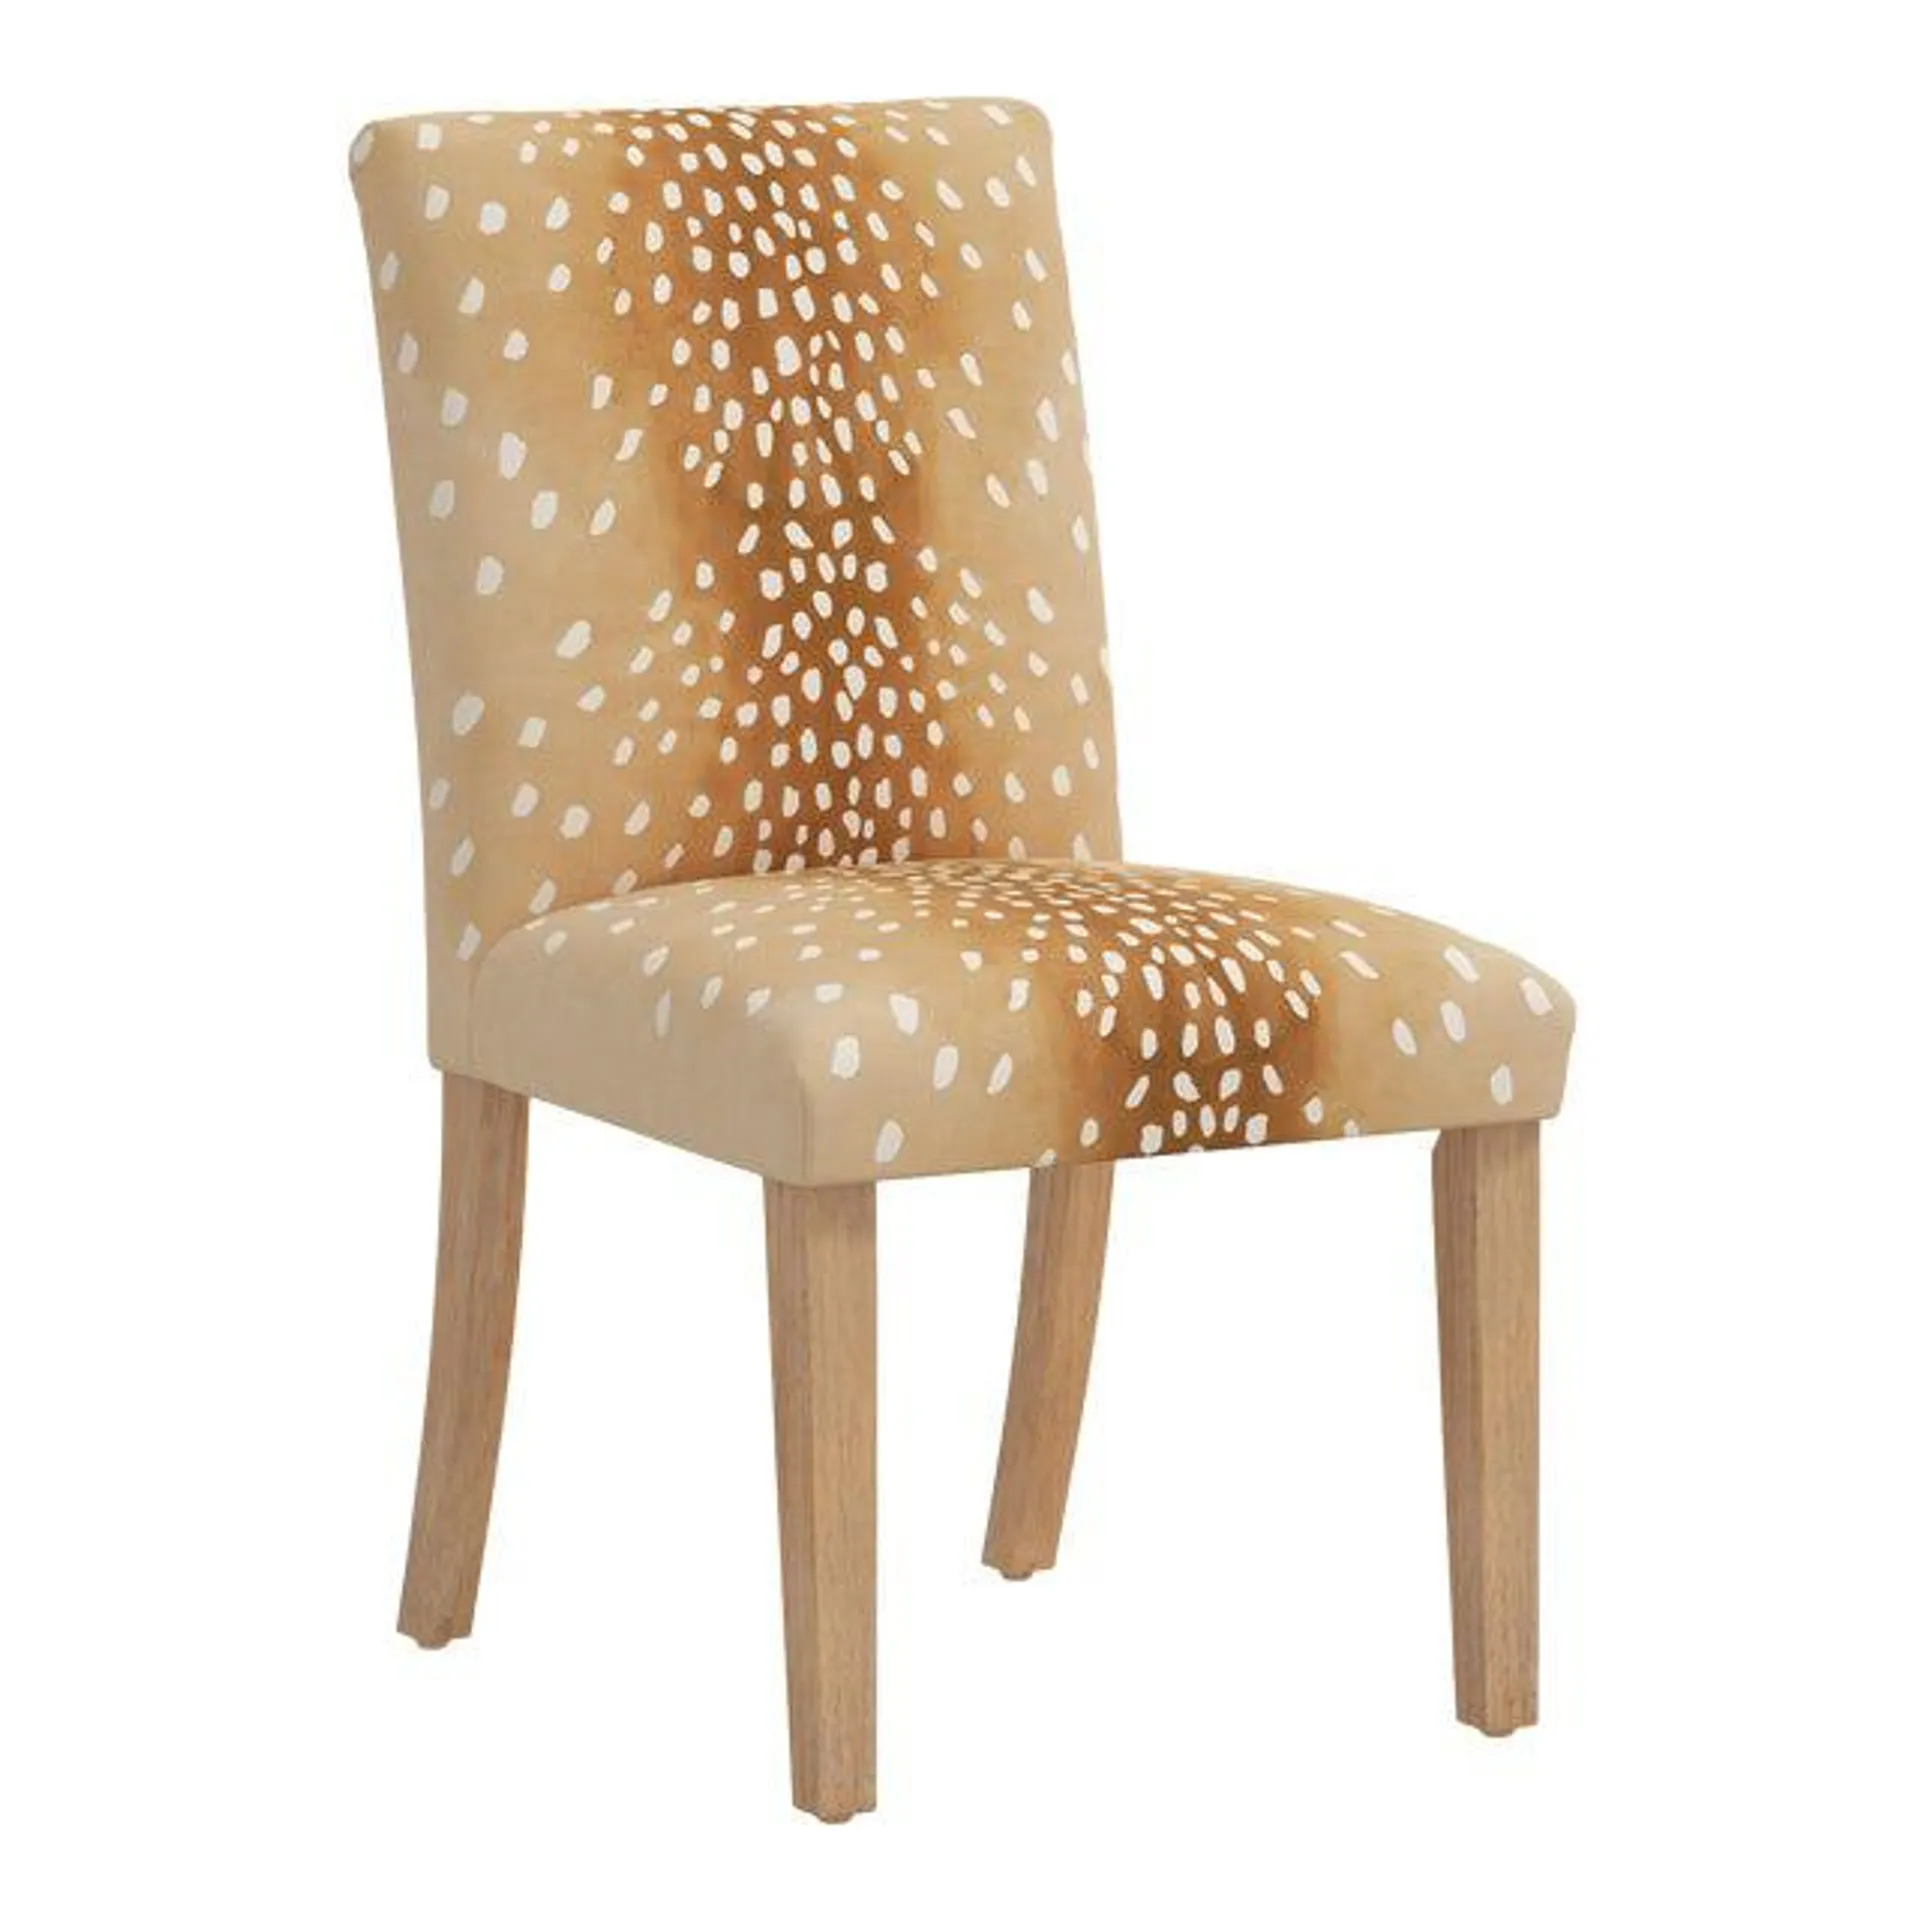 Dining Chair in Fawn Natural